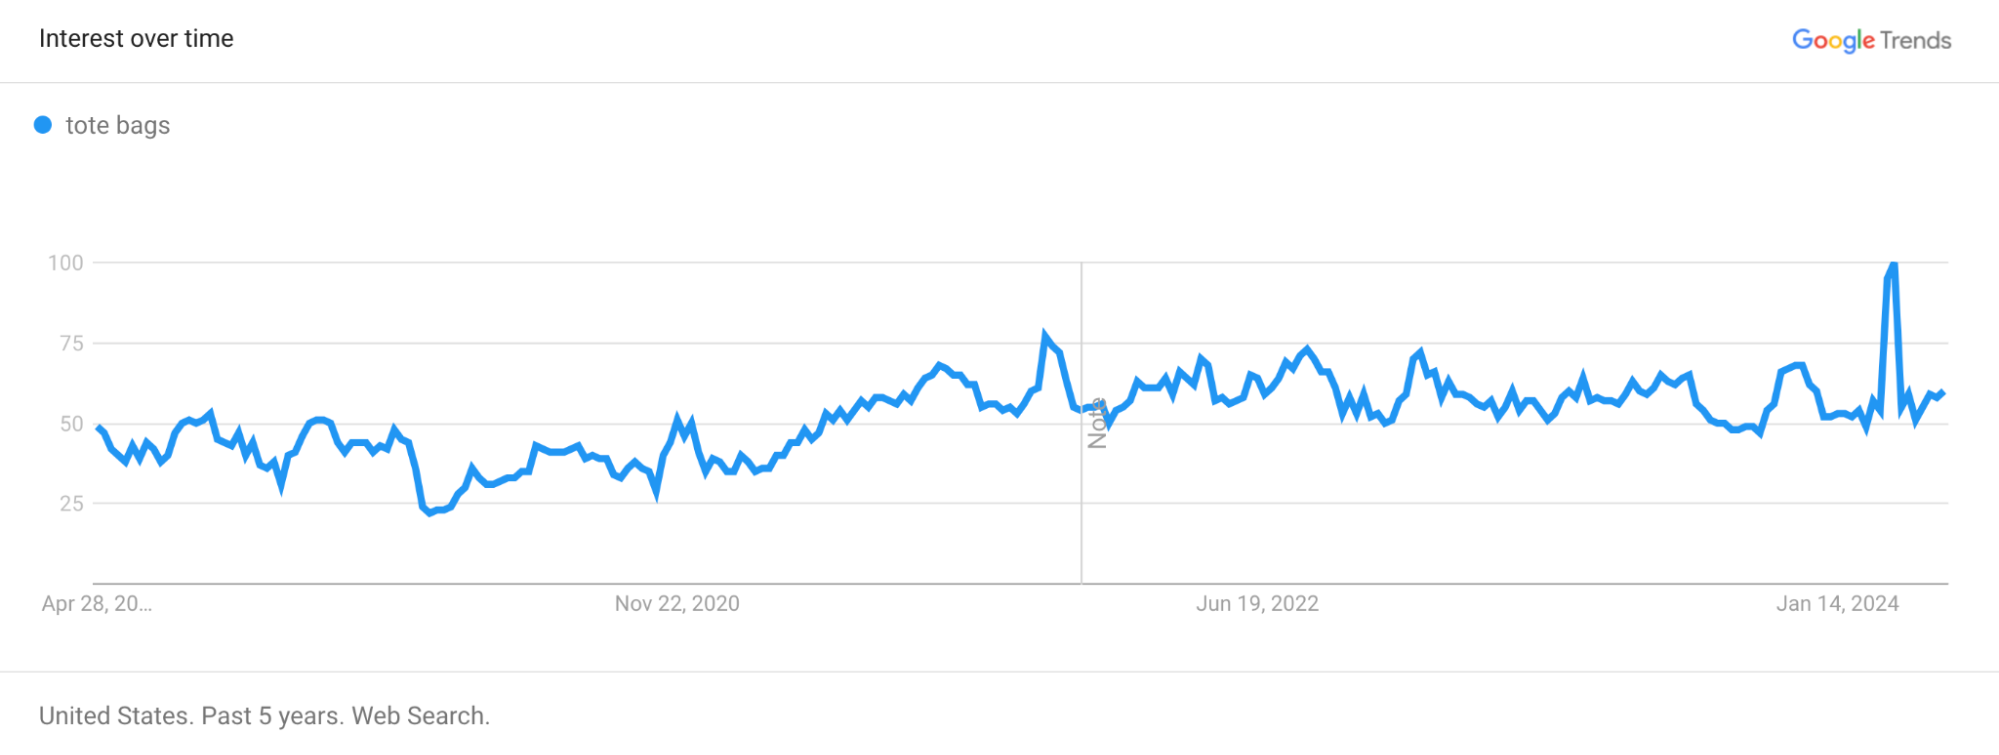 Tote bag demand shown on a Google Trends graph.